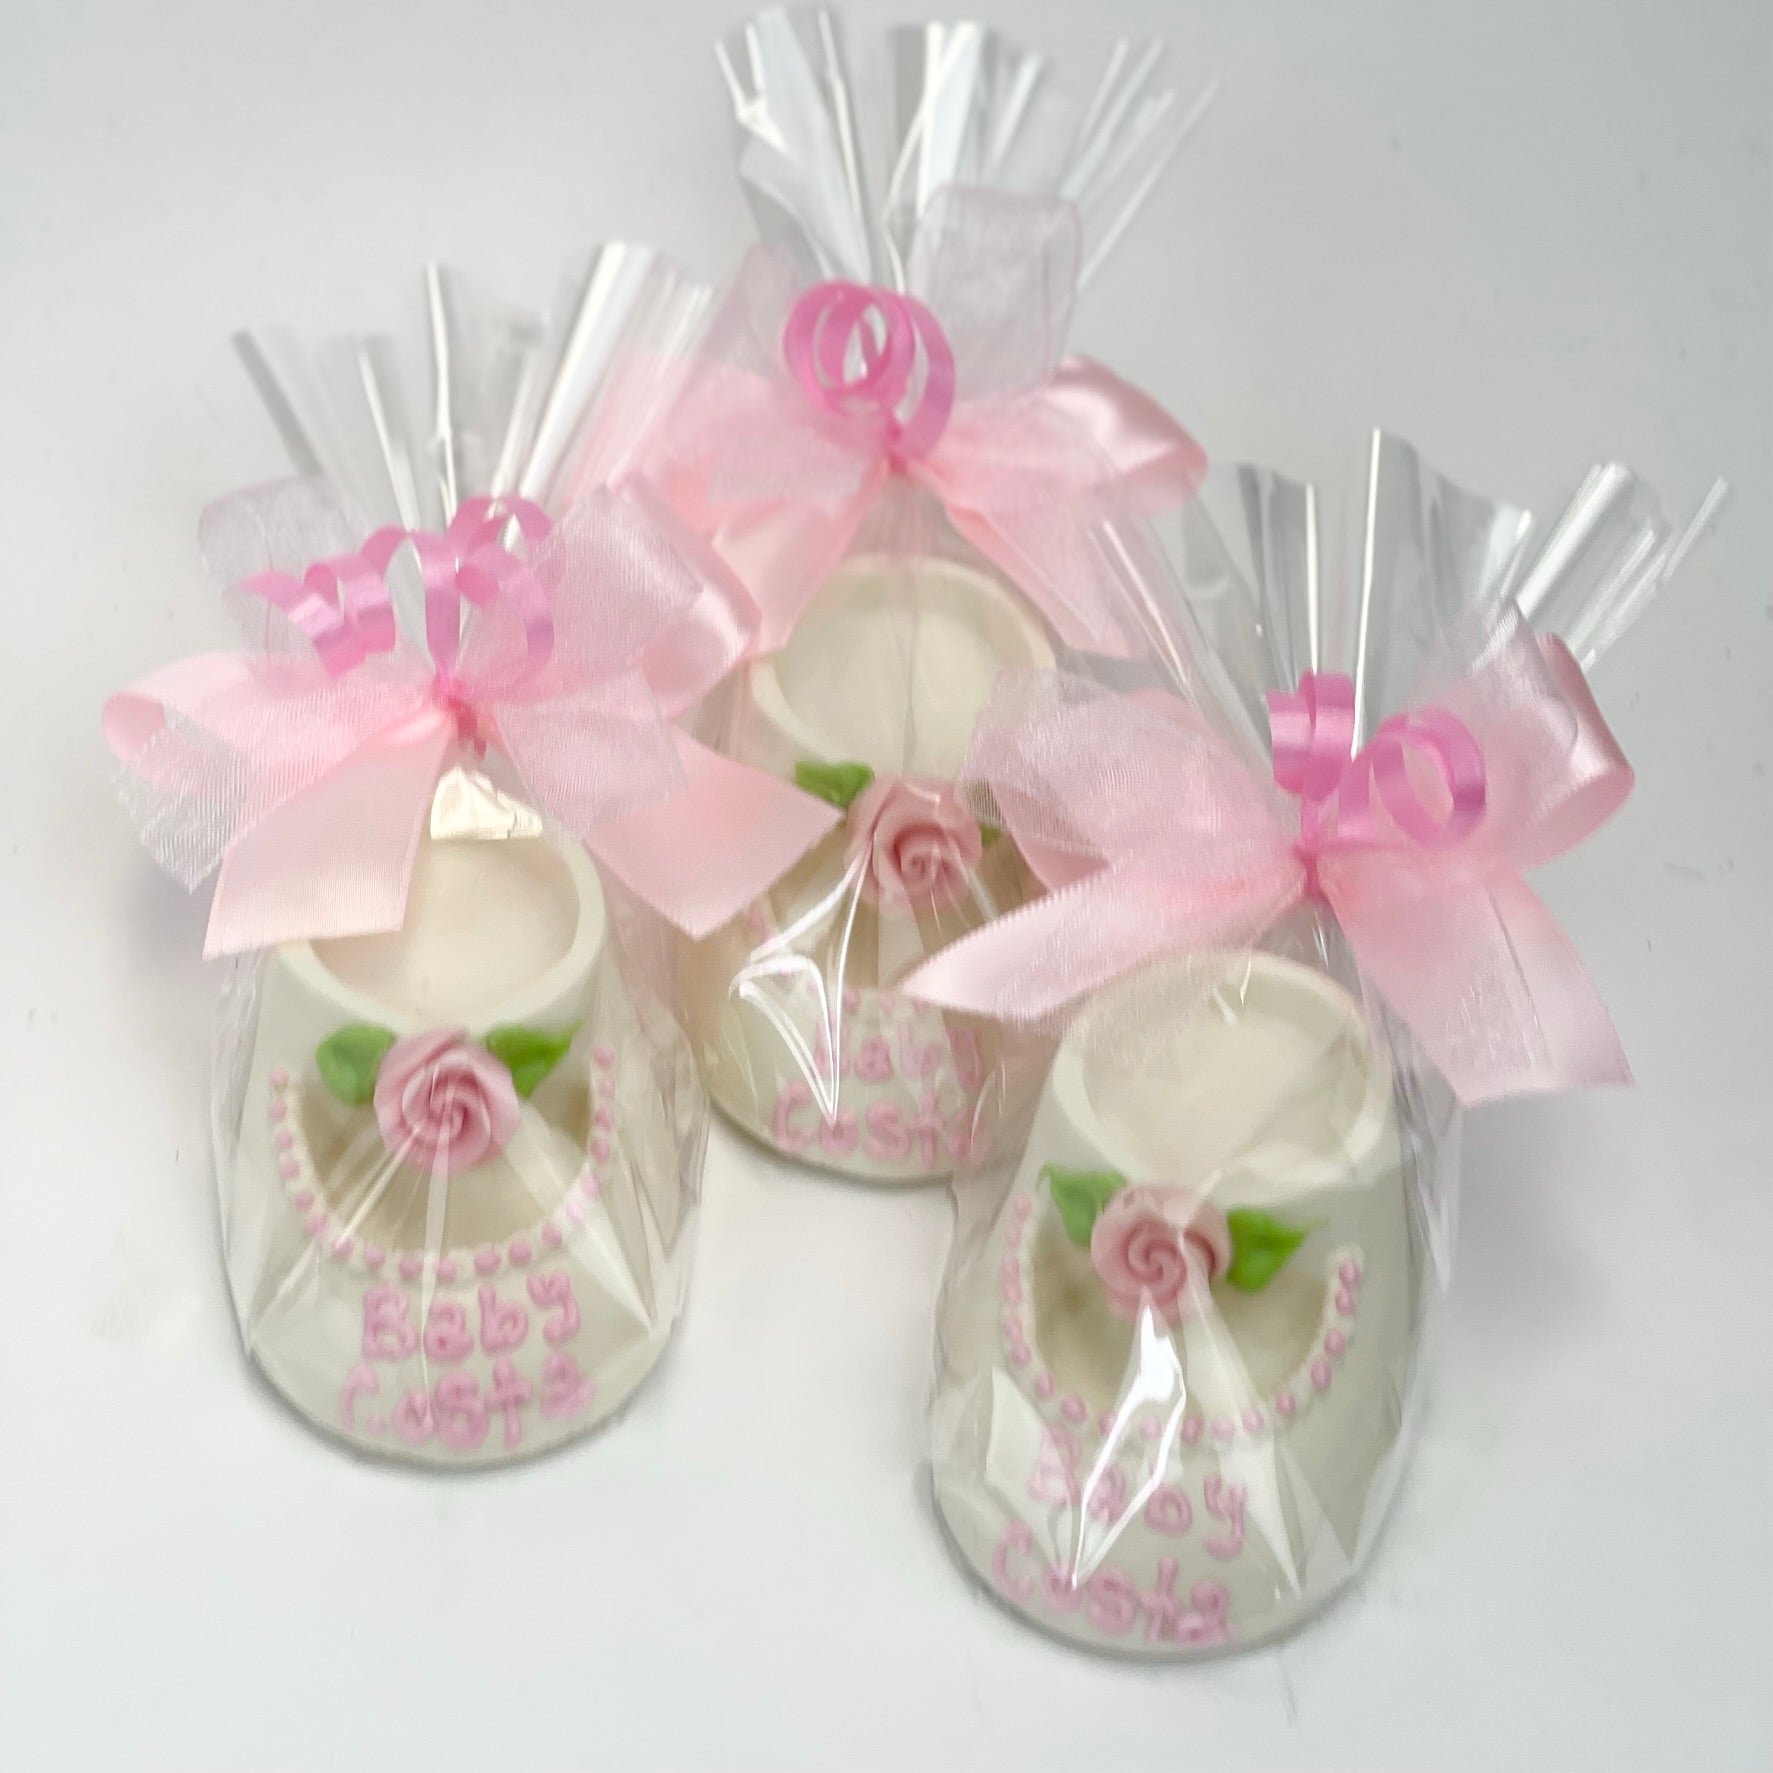 White Chocolate Baby Bootie warped in cellophane with a ribbon